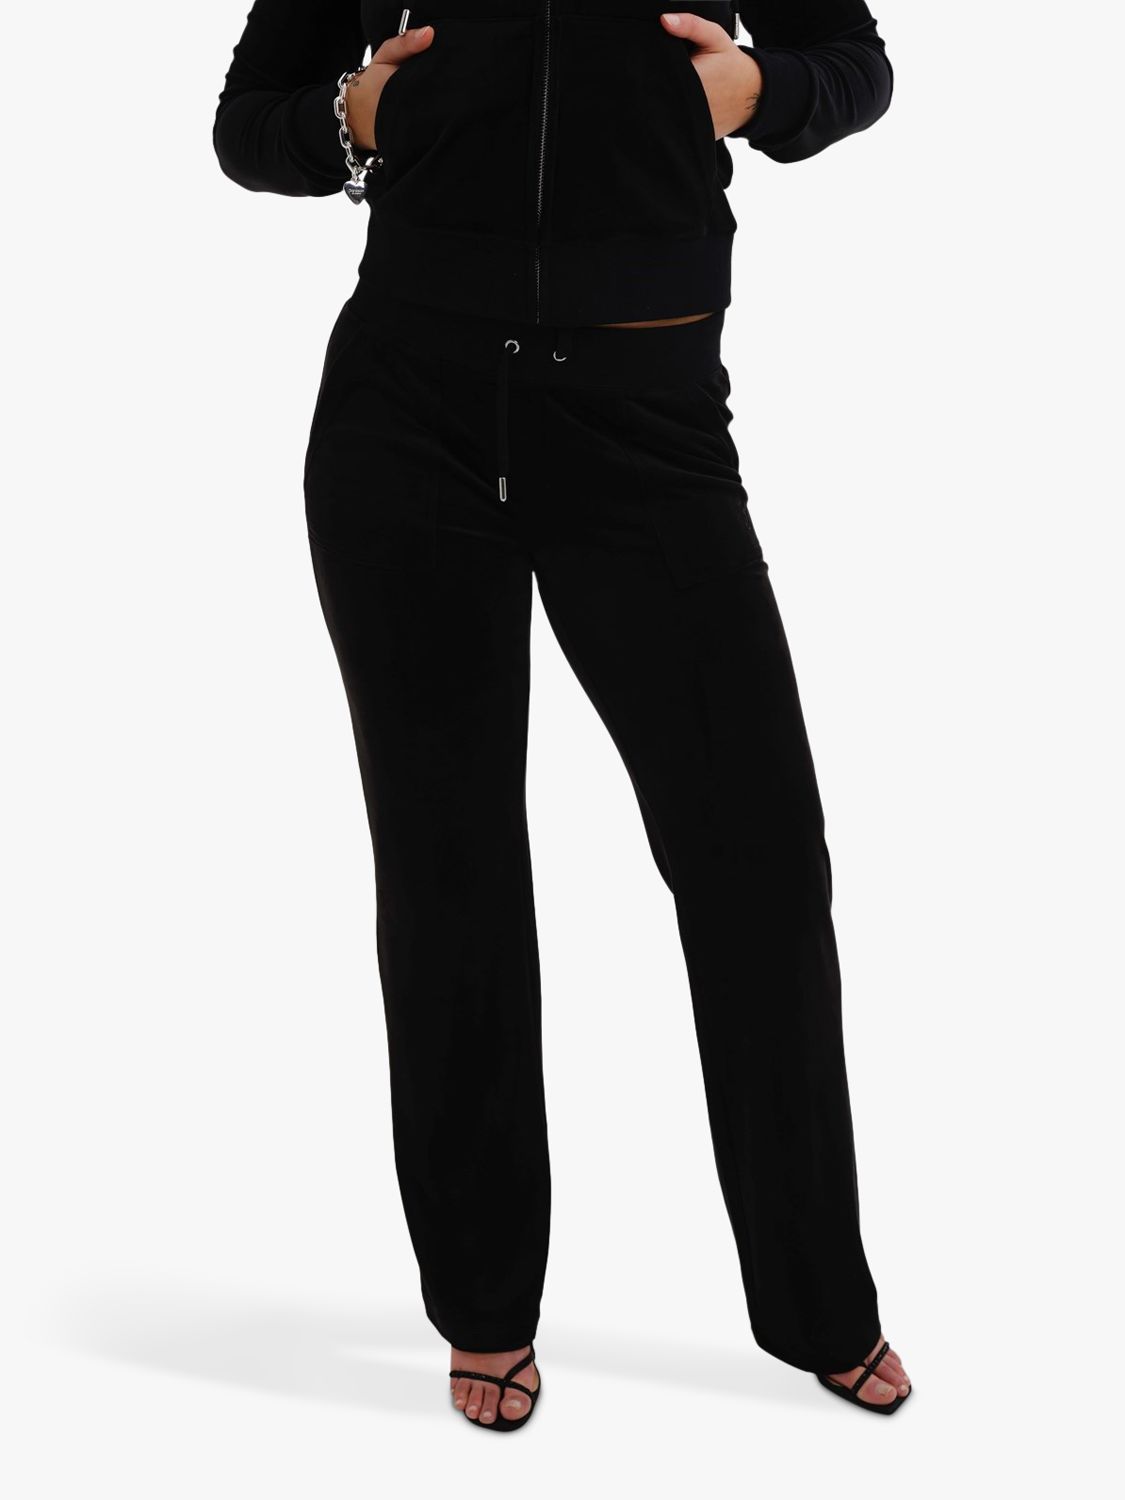 Juicy Couture Del Ray Tracksuit Bottoms, Black at John Lewis